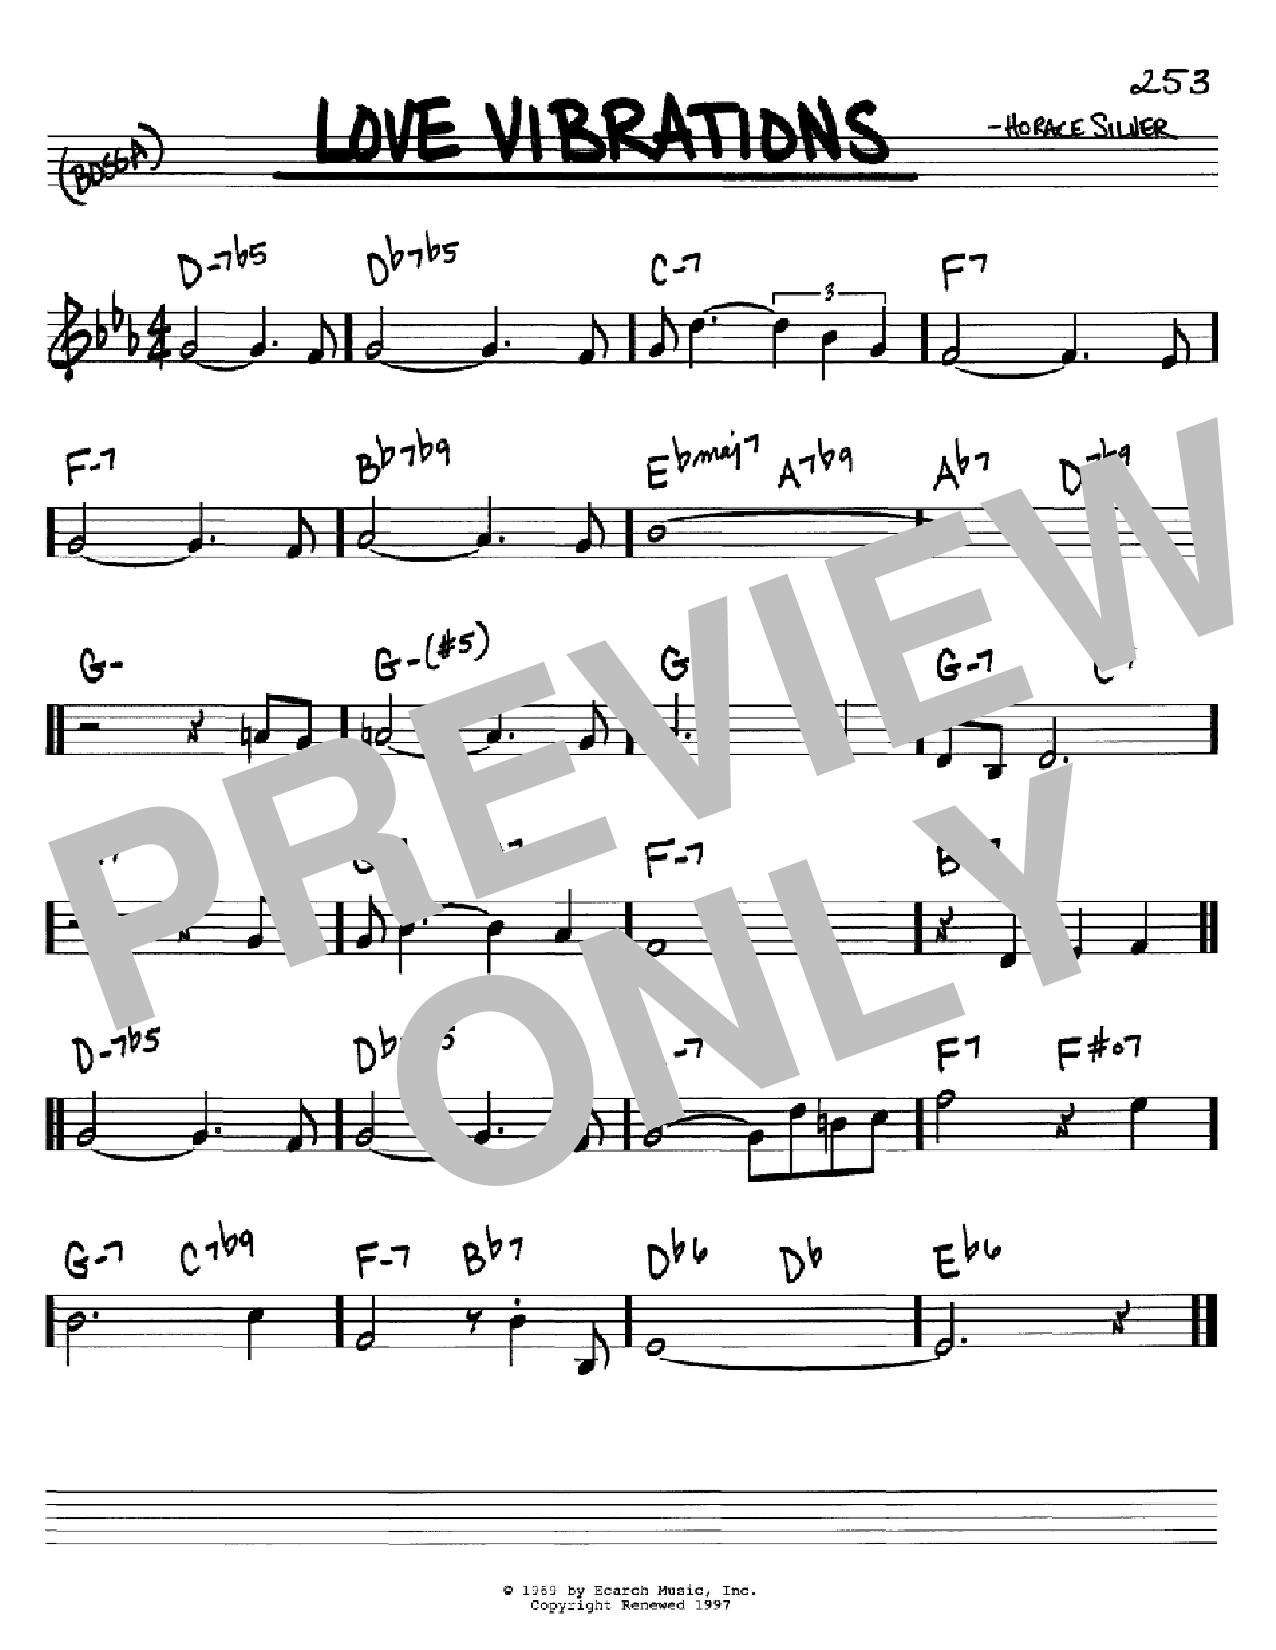 Download Horace Silver Love Vibrations Sheet Music